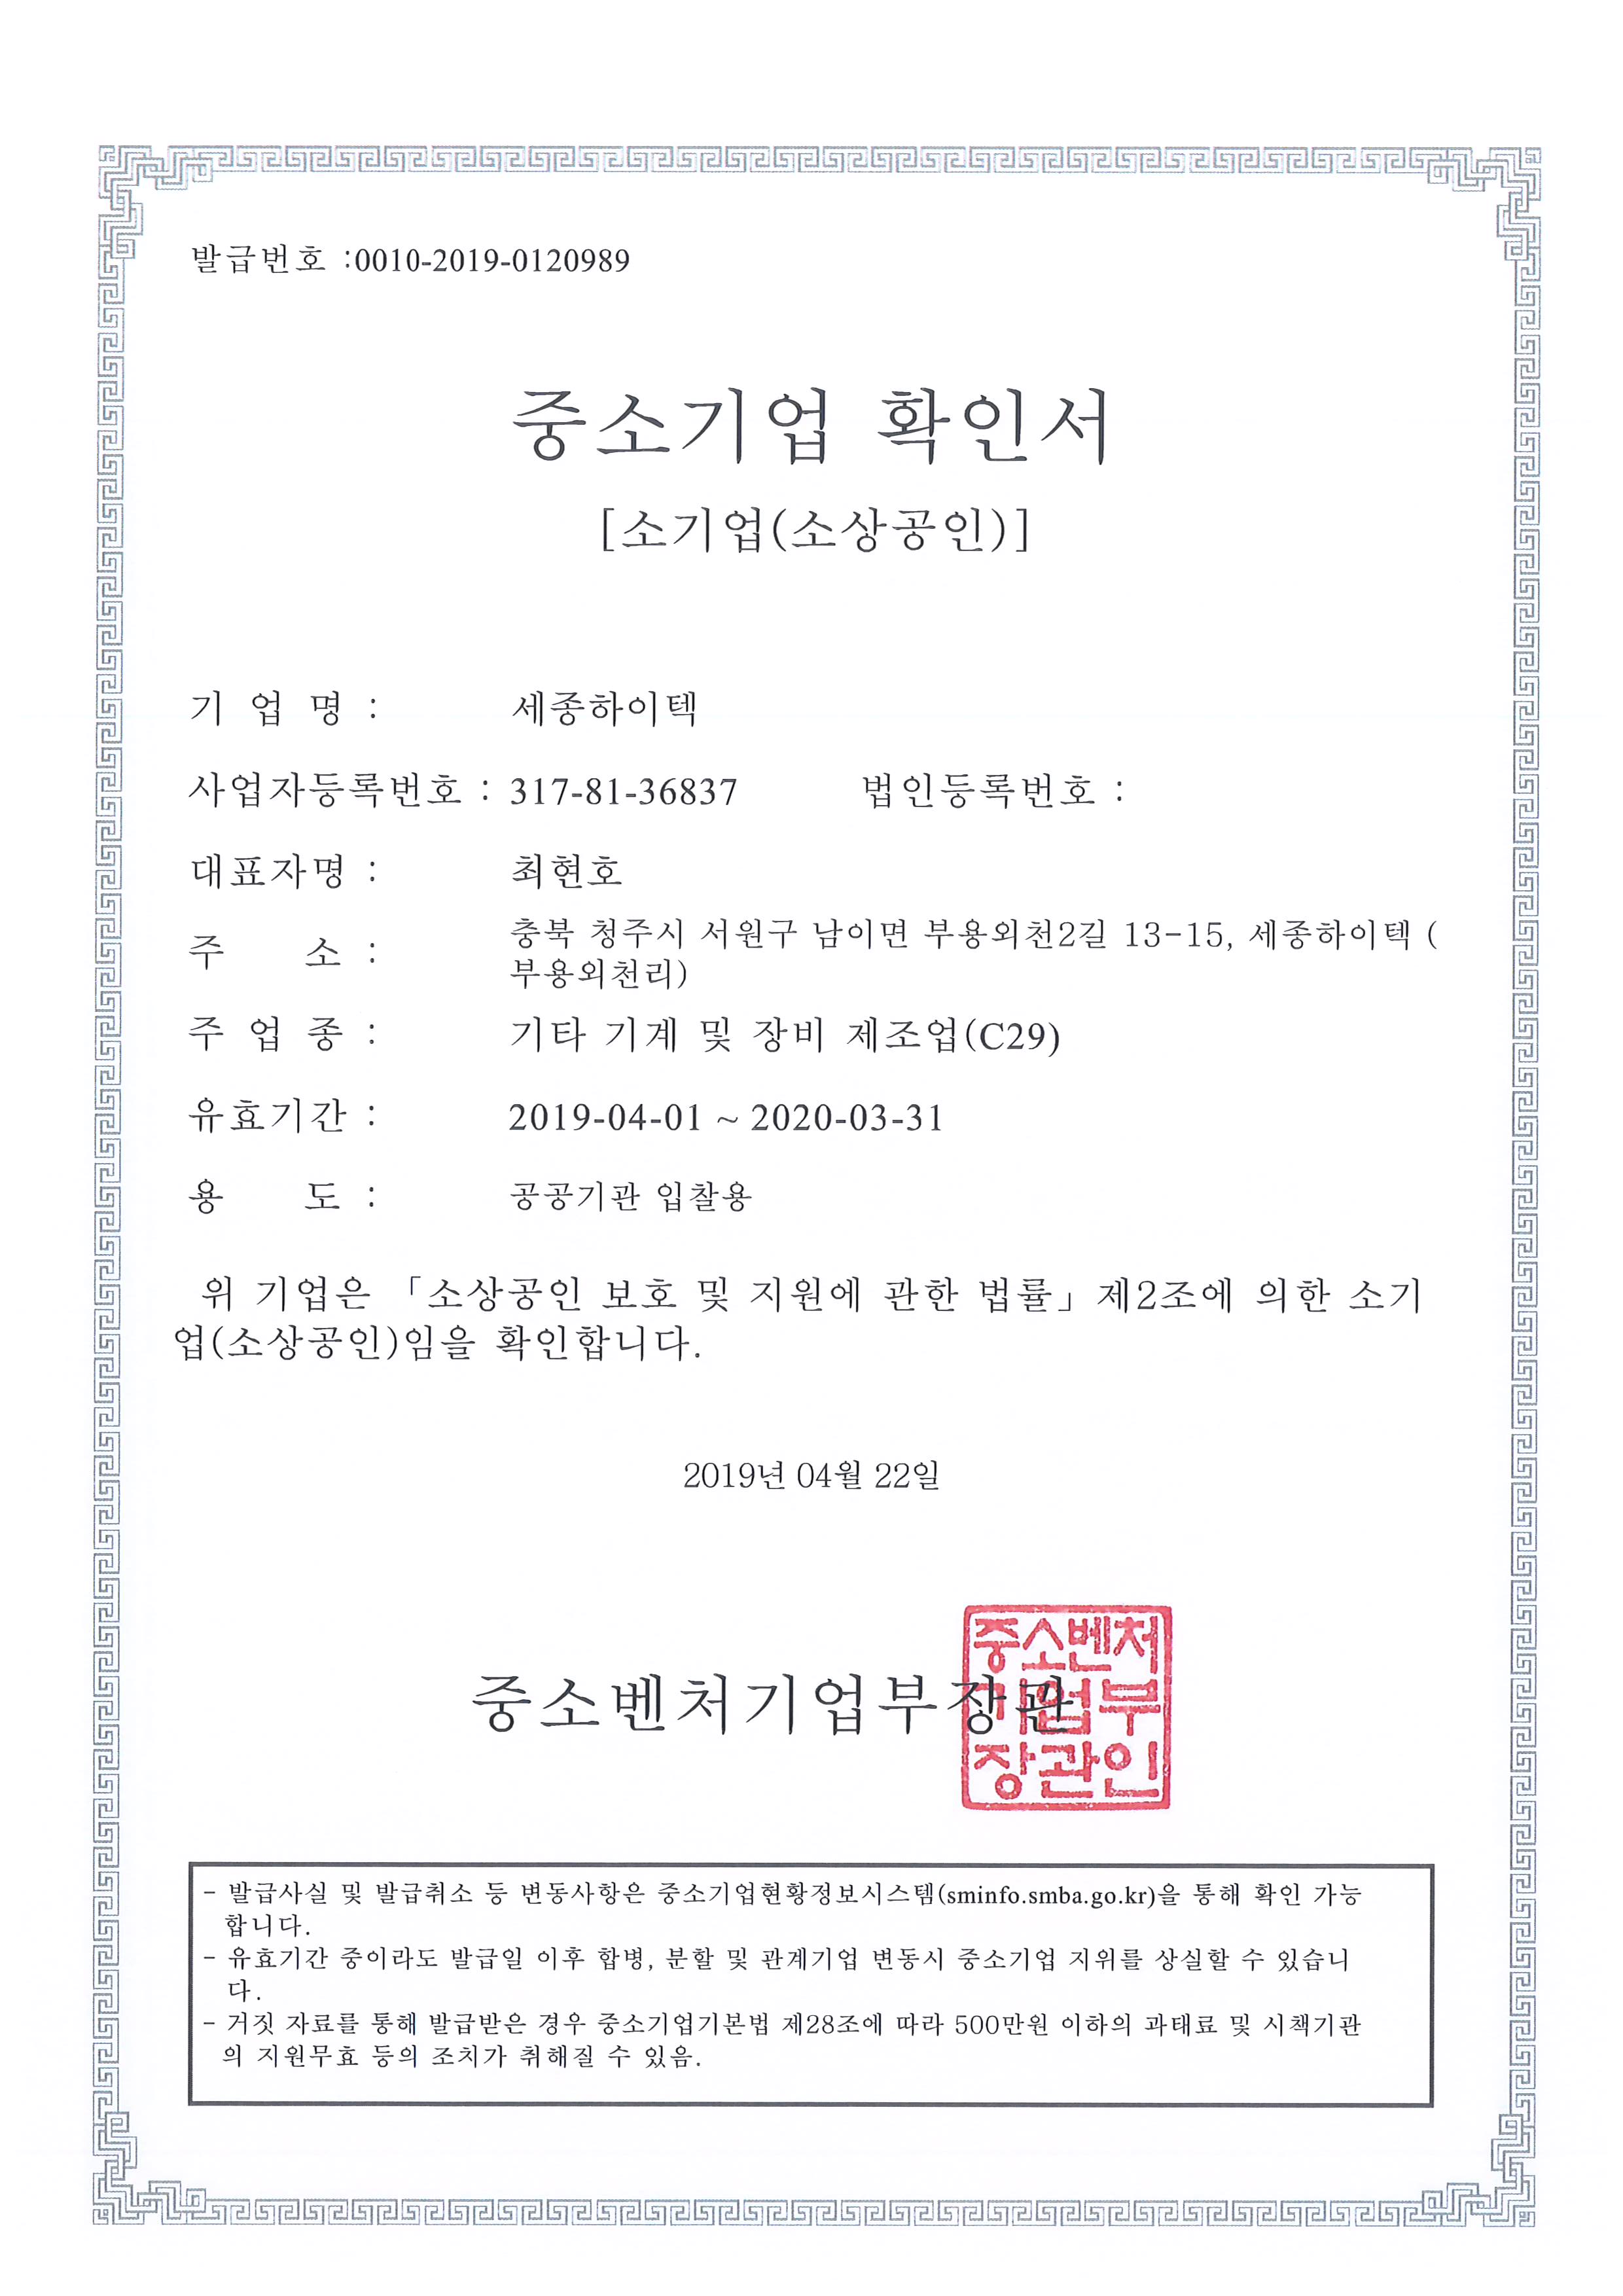 Certification-Small and medium business confirmation [첨부 이미지1]